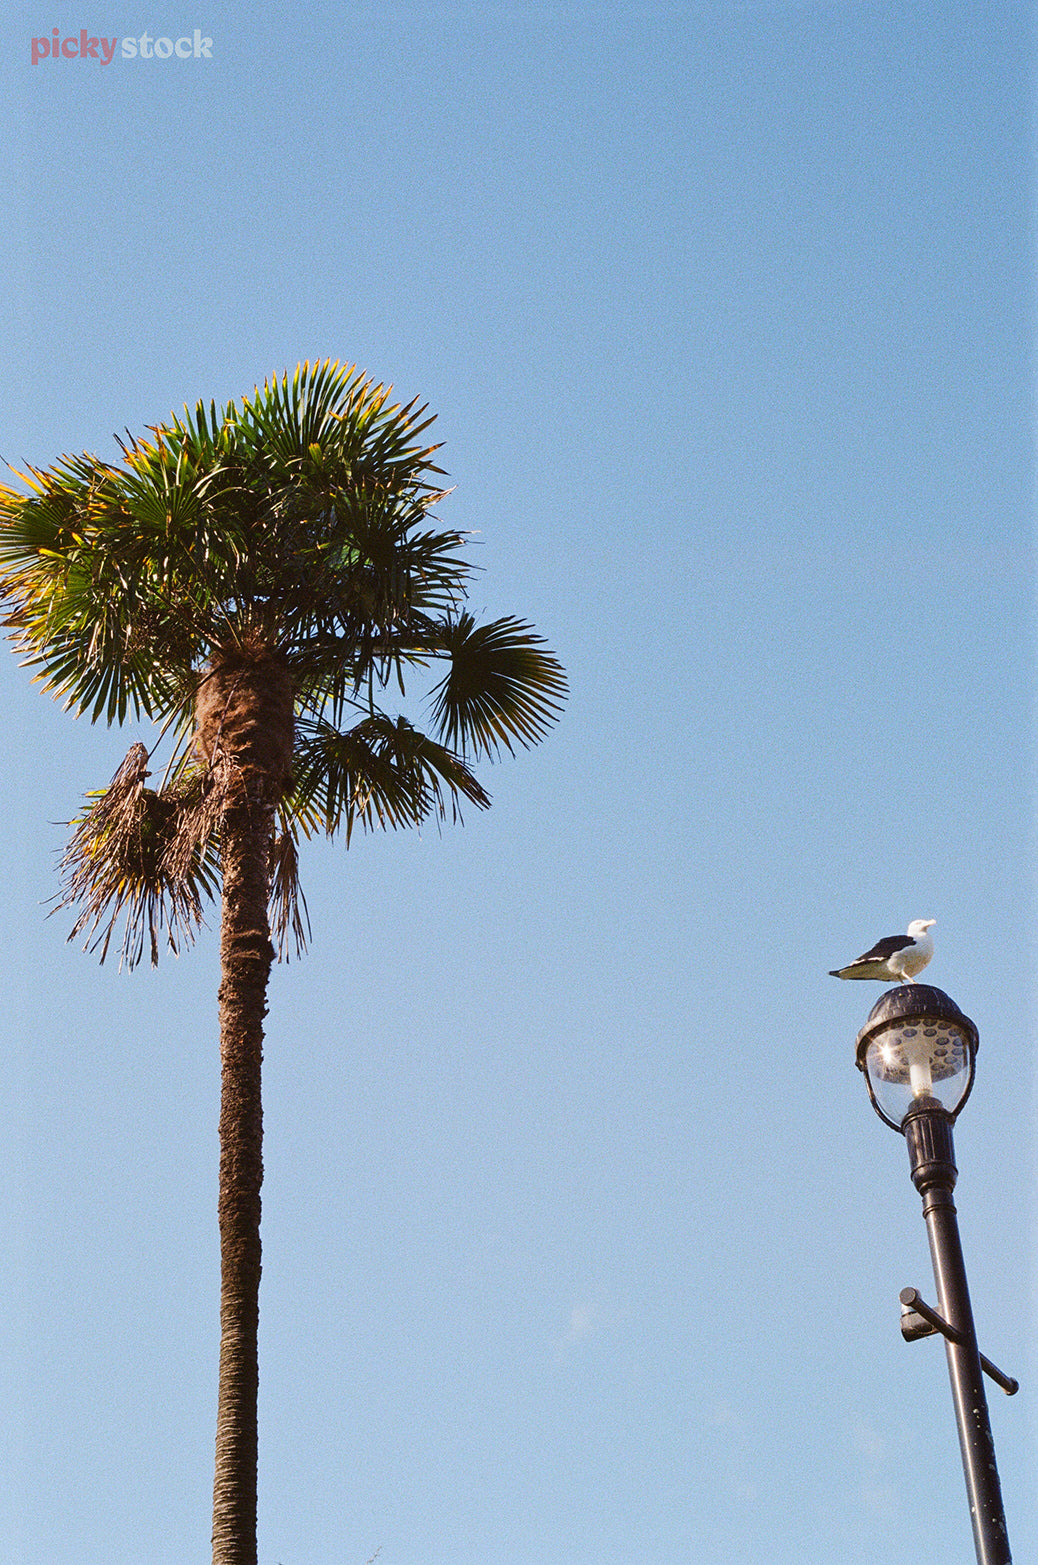 Looking upwards to palmtree with frons on a blue day, next to an old-fashioned street lamp with one seagull perched on top. 